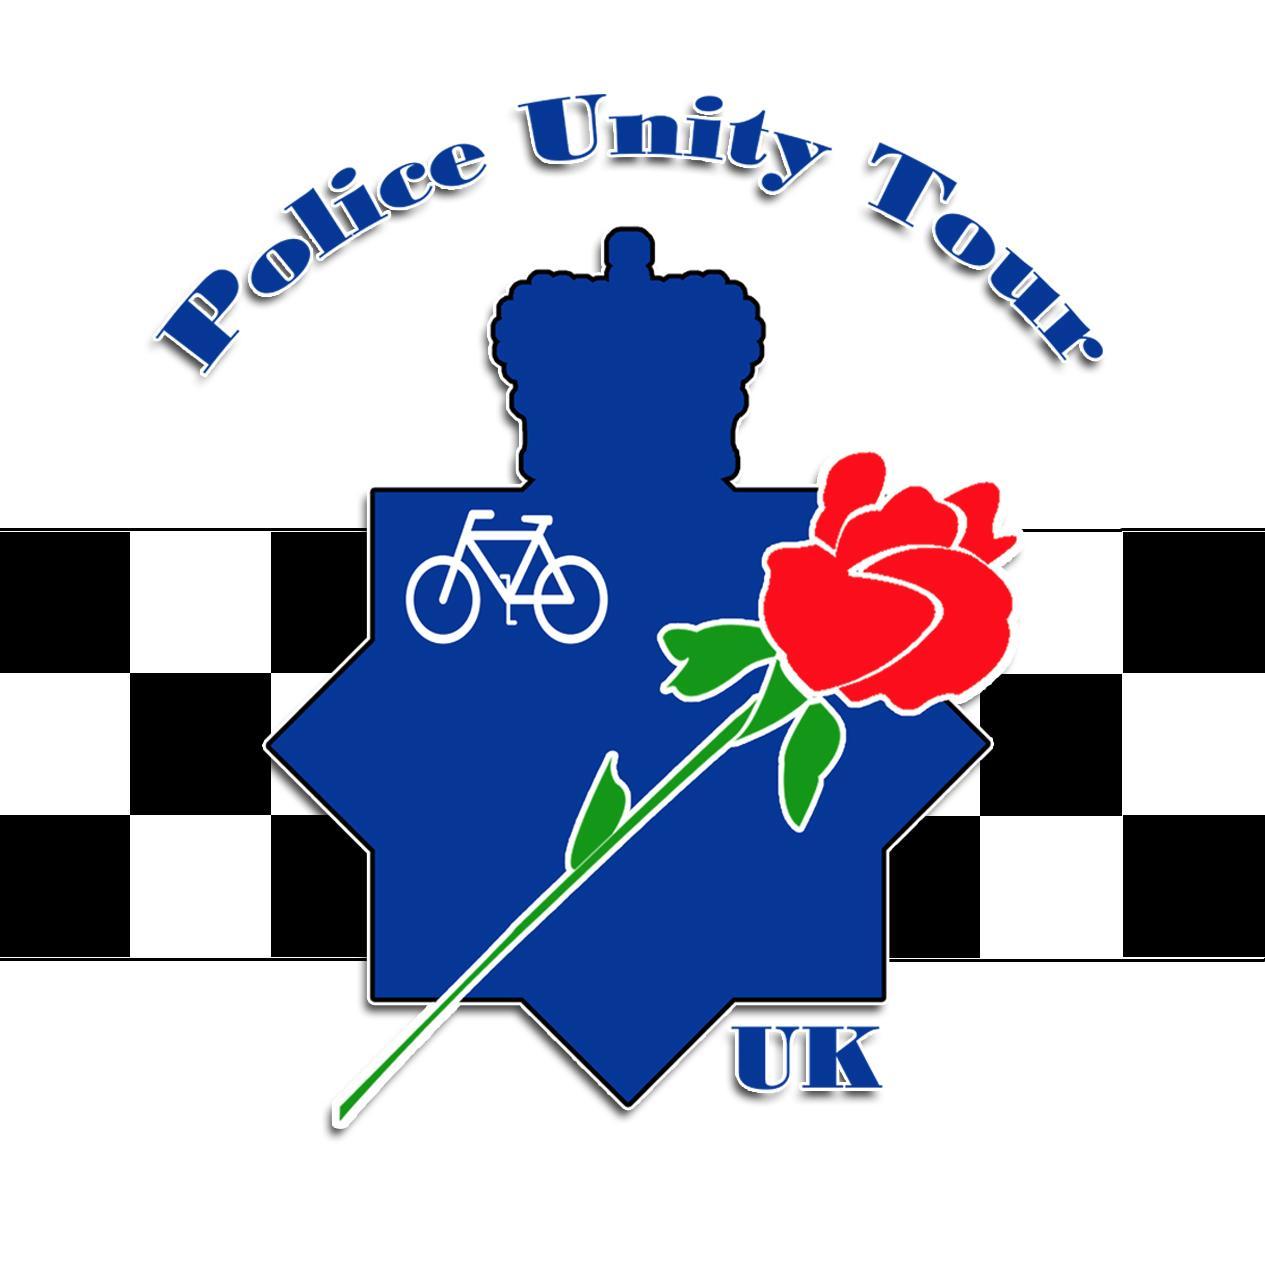 Annual cycle ride from the National Police Memorial (London) to the National Arboretum (Staffordshire) in aid of raising funds for Care of Police Survivors.